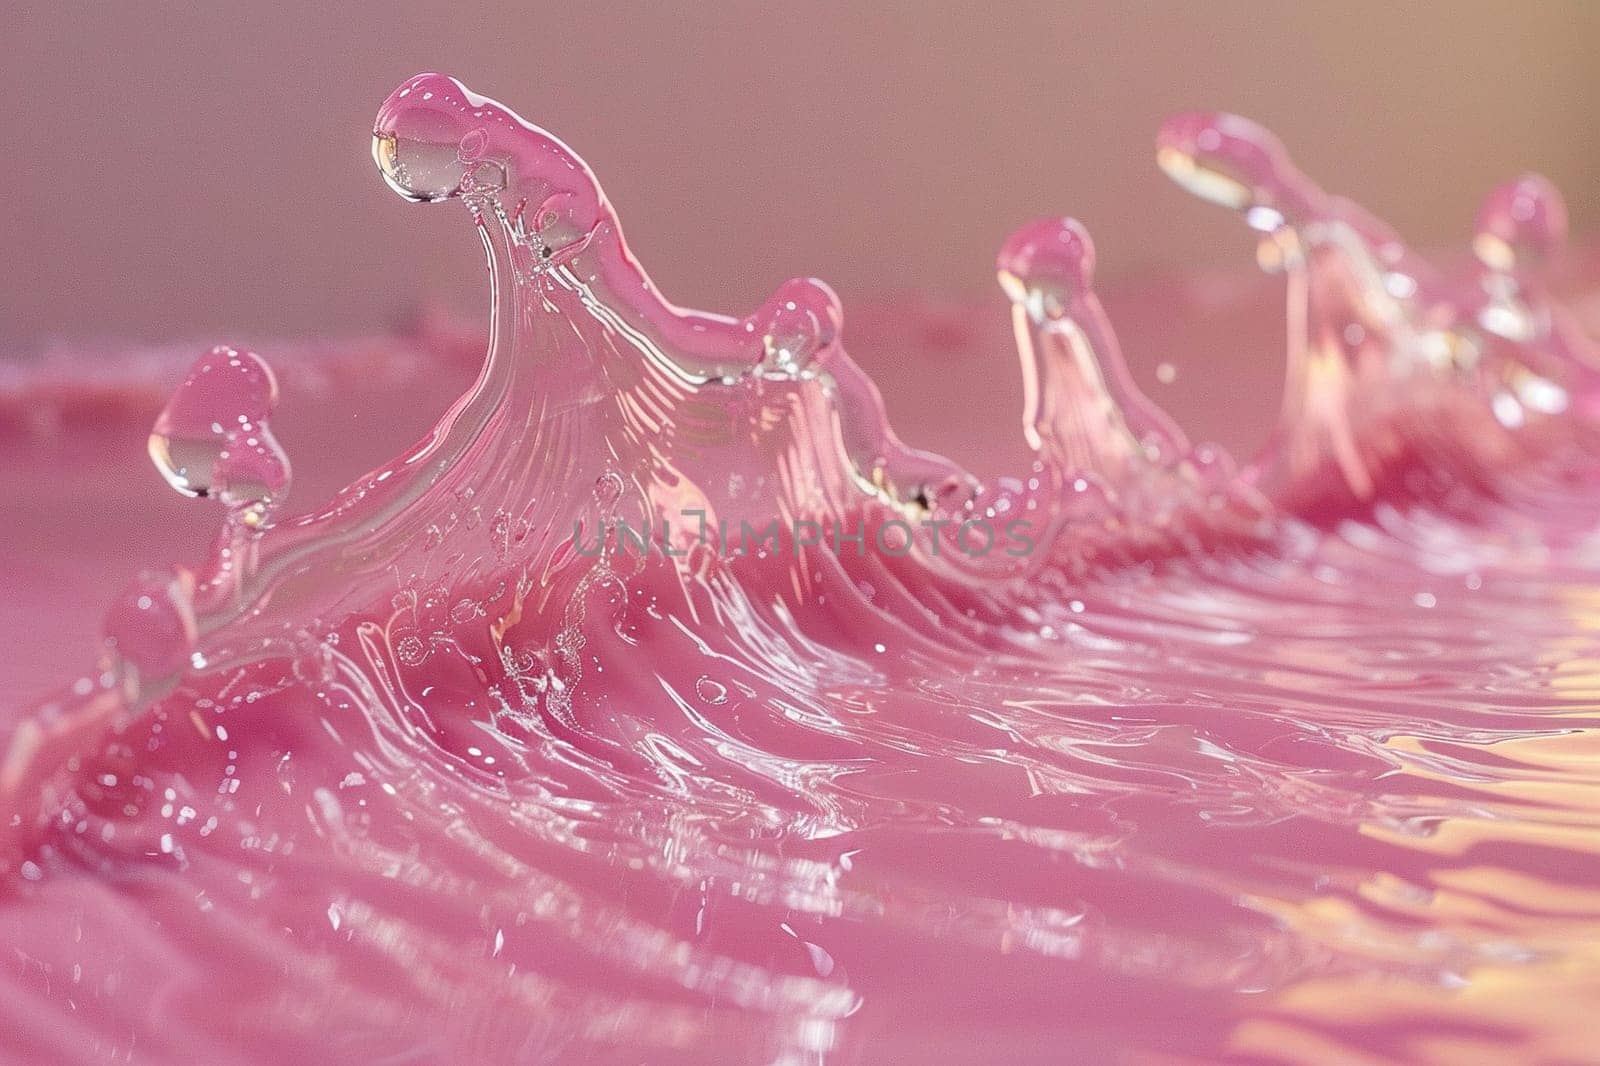 Splash of pink liquid. Abstract background of liquid in motion.